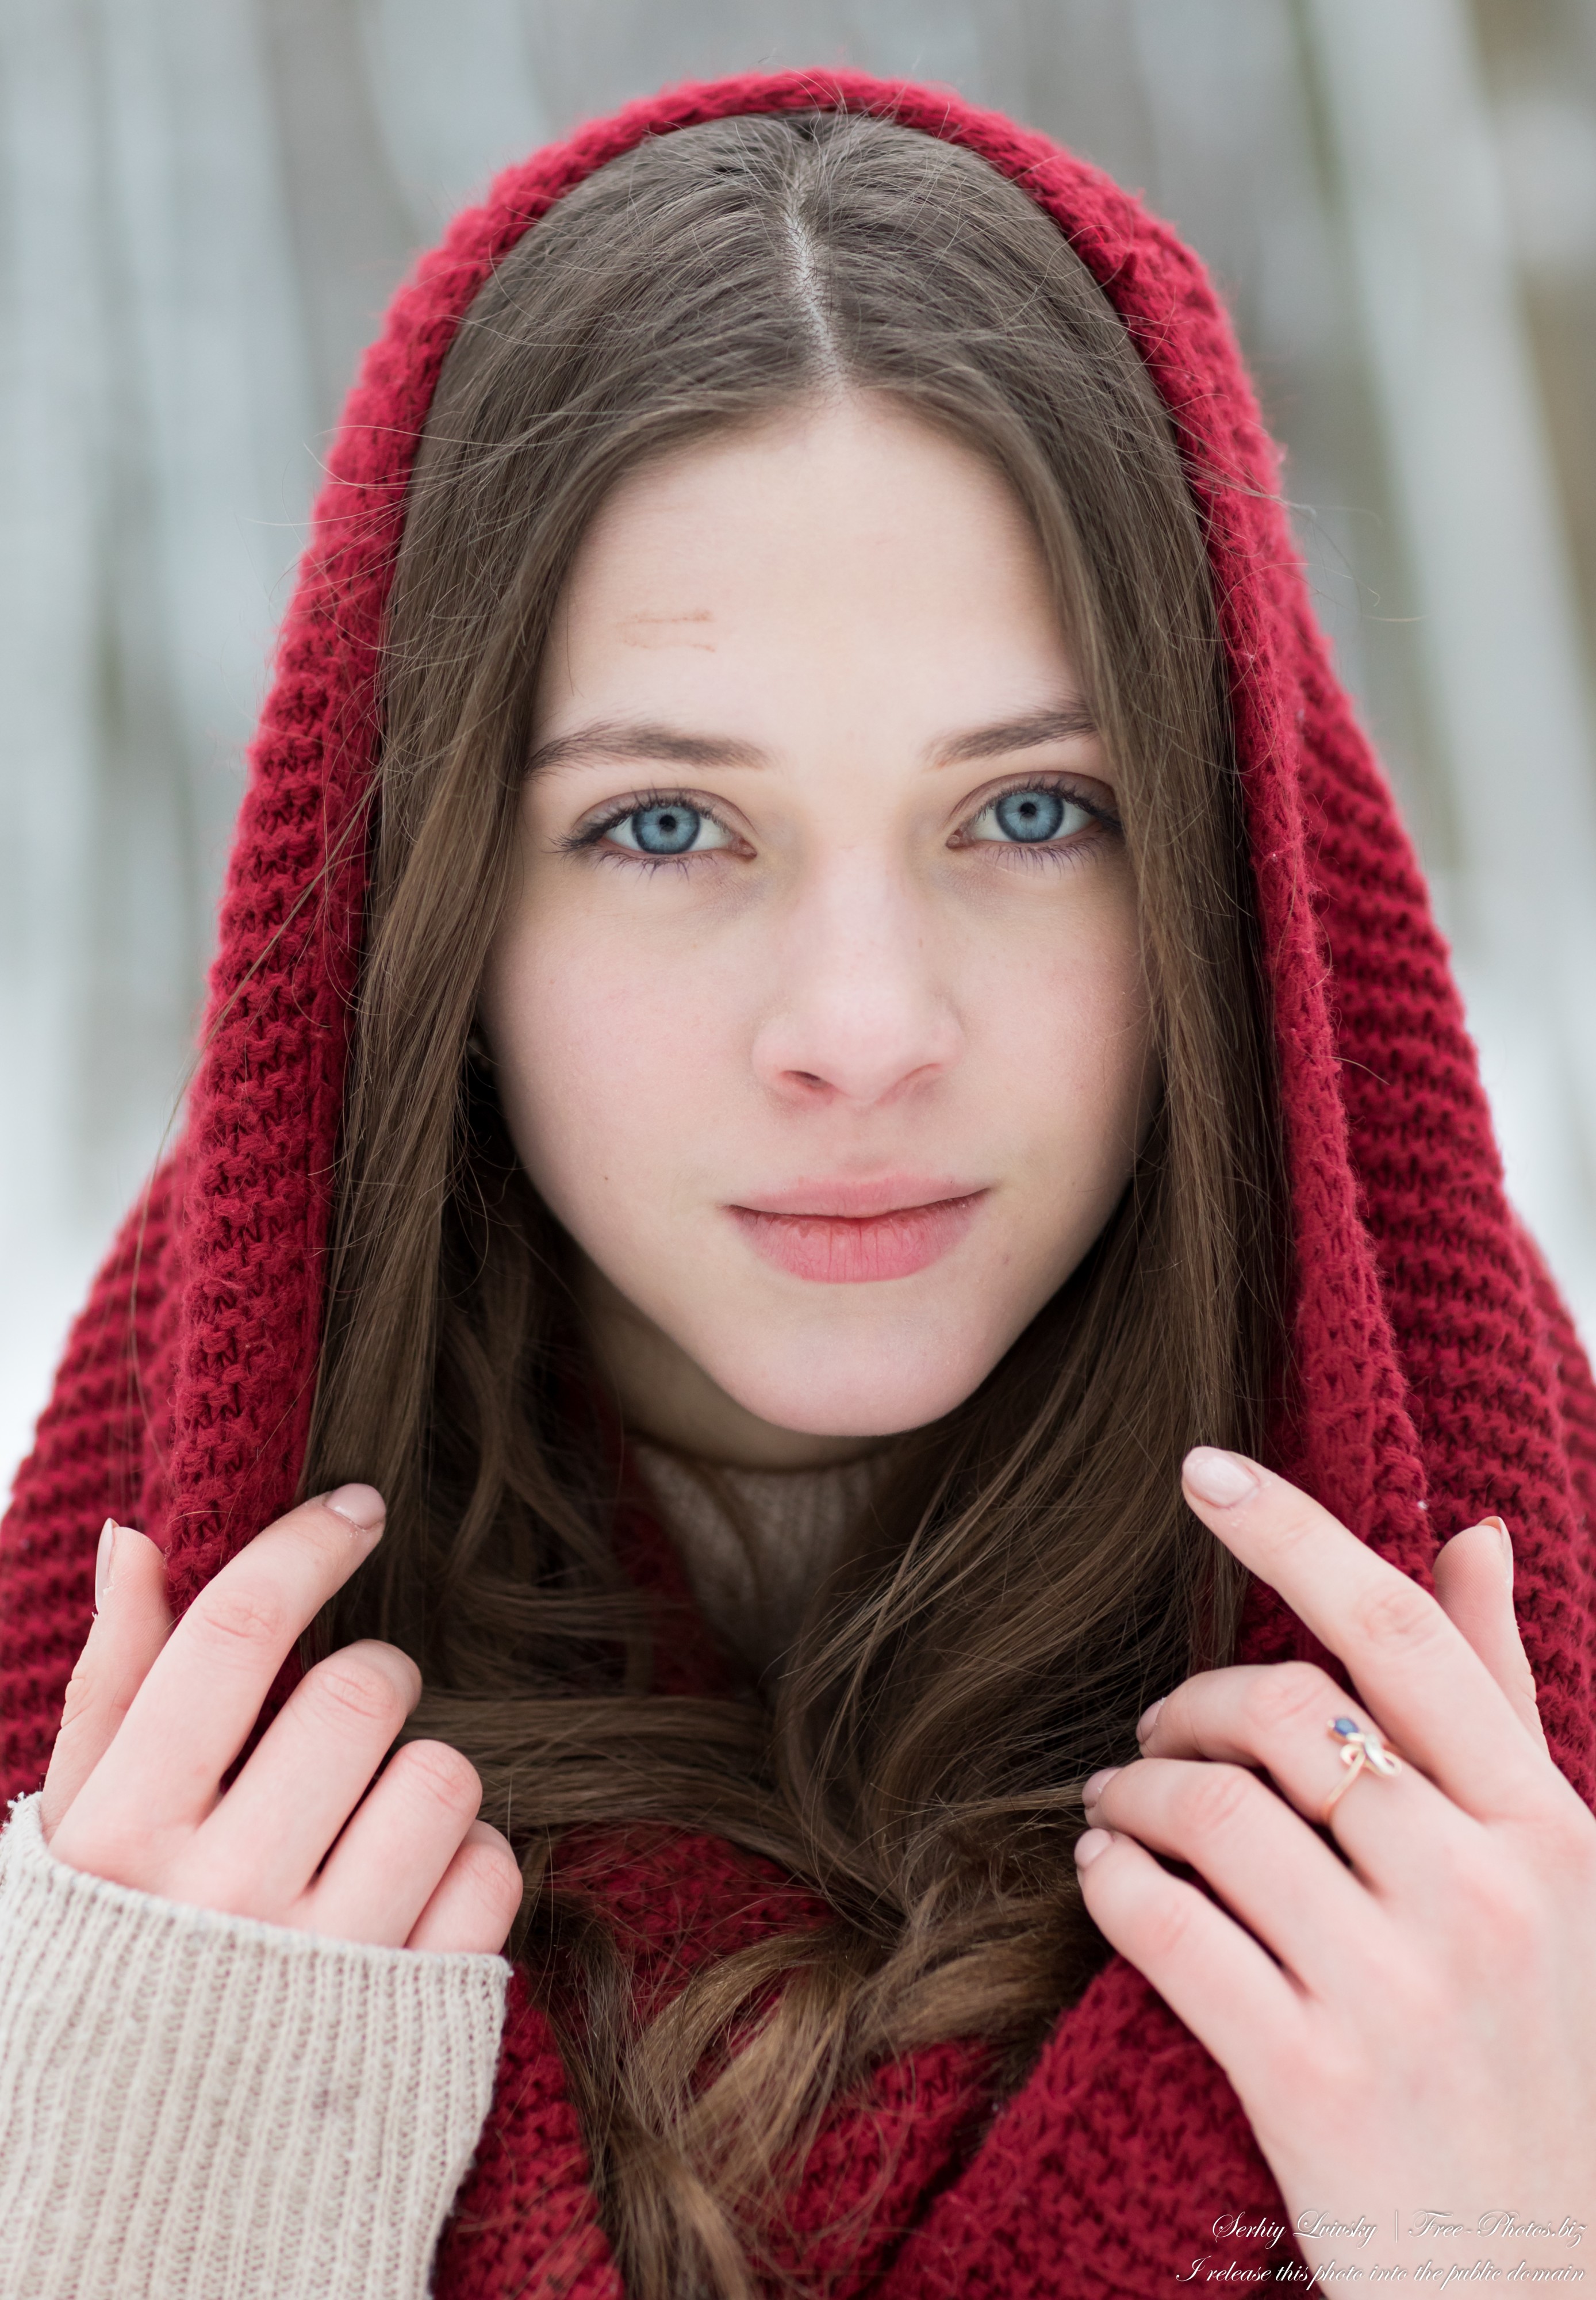 Sophia - a 17-year-old girl with blue eyes photographed by Serhiy Lvivsky in January 2022, picture 16